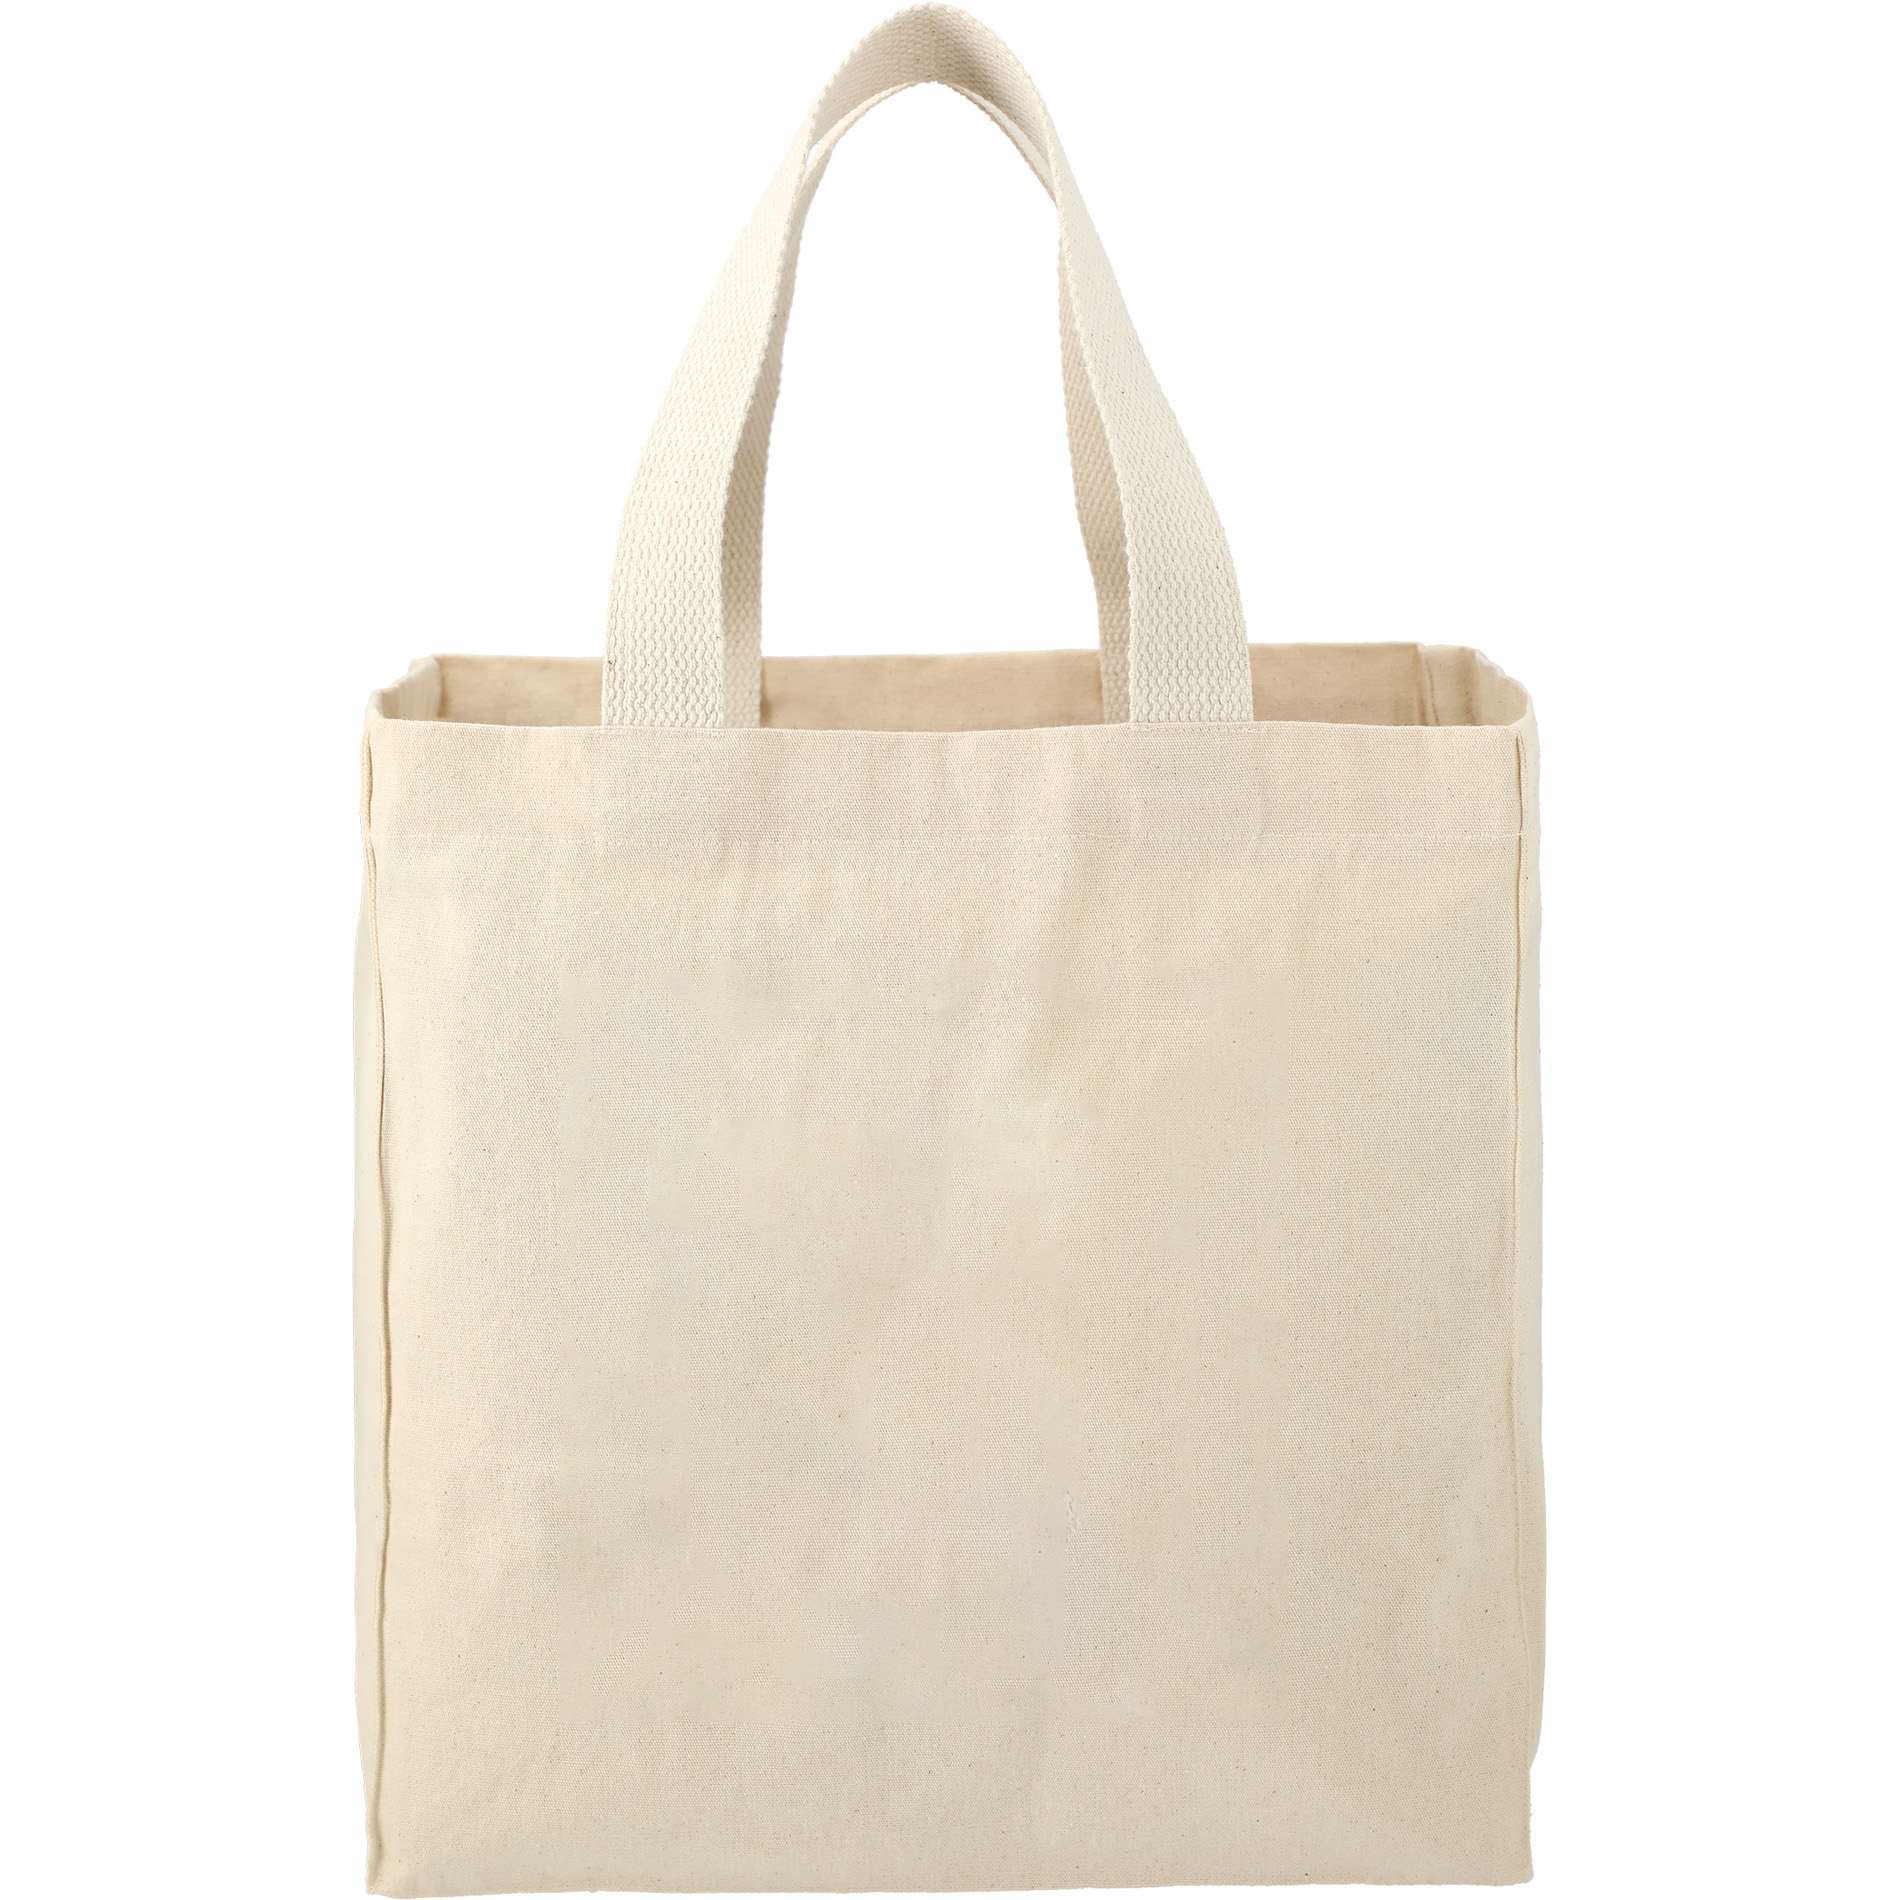 LEEDS 7900-00 - Essential 8oz Cotton Grocery Tote